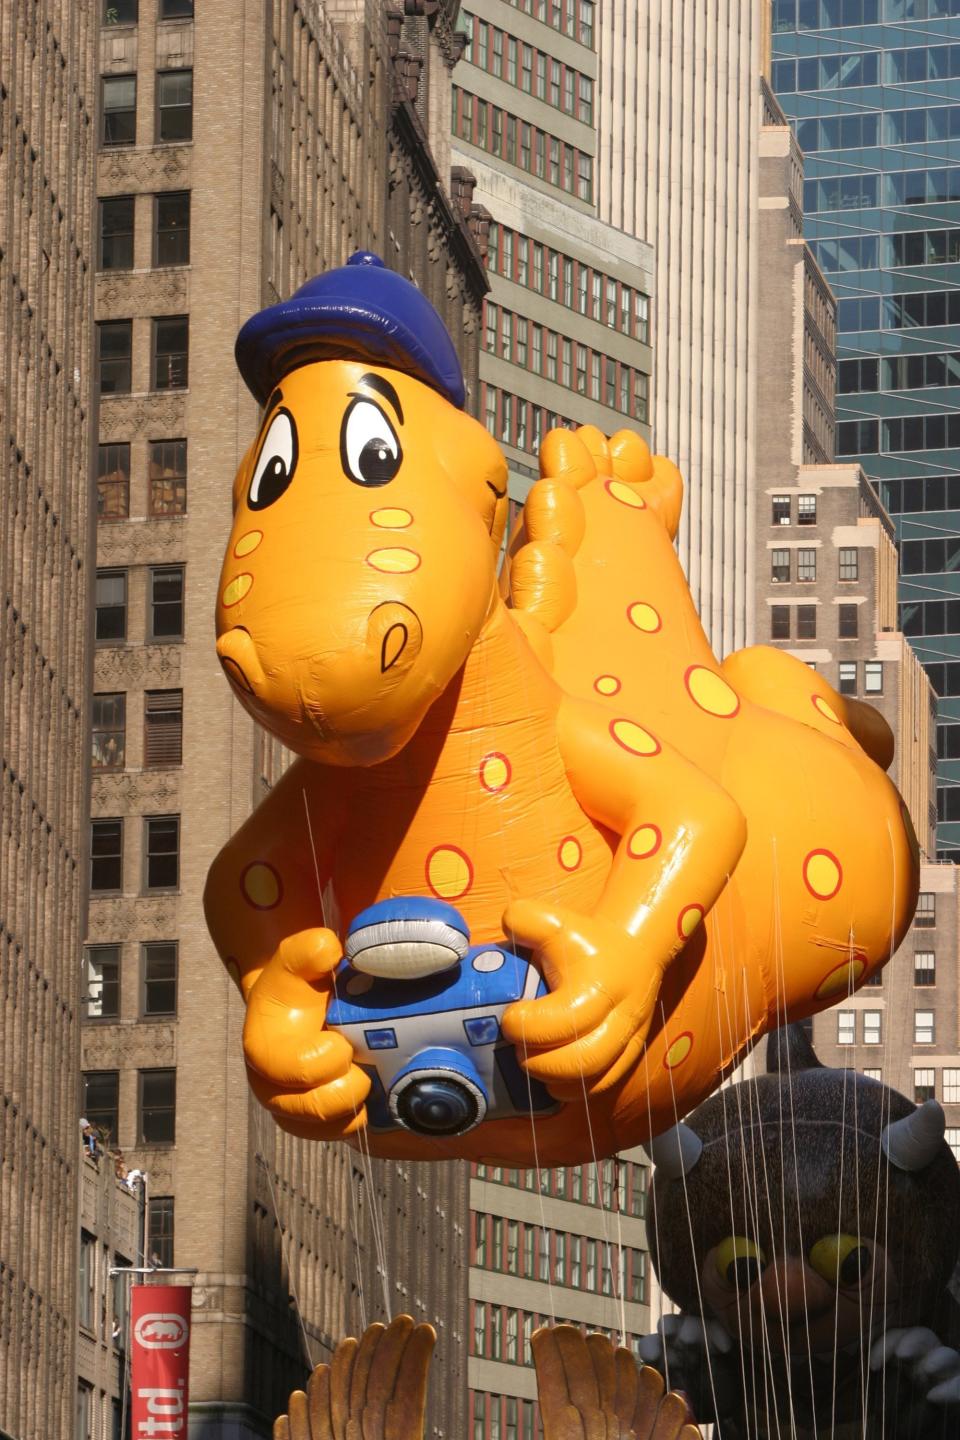 This dino is solely responsible for kids of the 2000s asking their parents for a <a href="http://www.youtube.com/watch?v=SmGl2Qx1uDQ" target="_blank">cheese slip n' slide</a>.